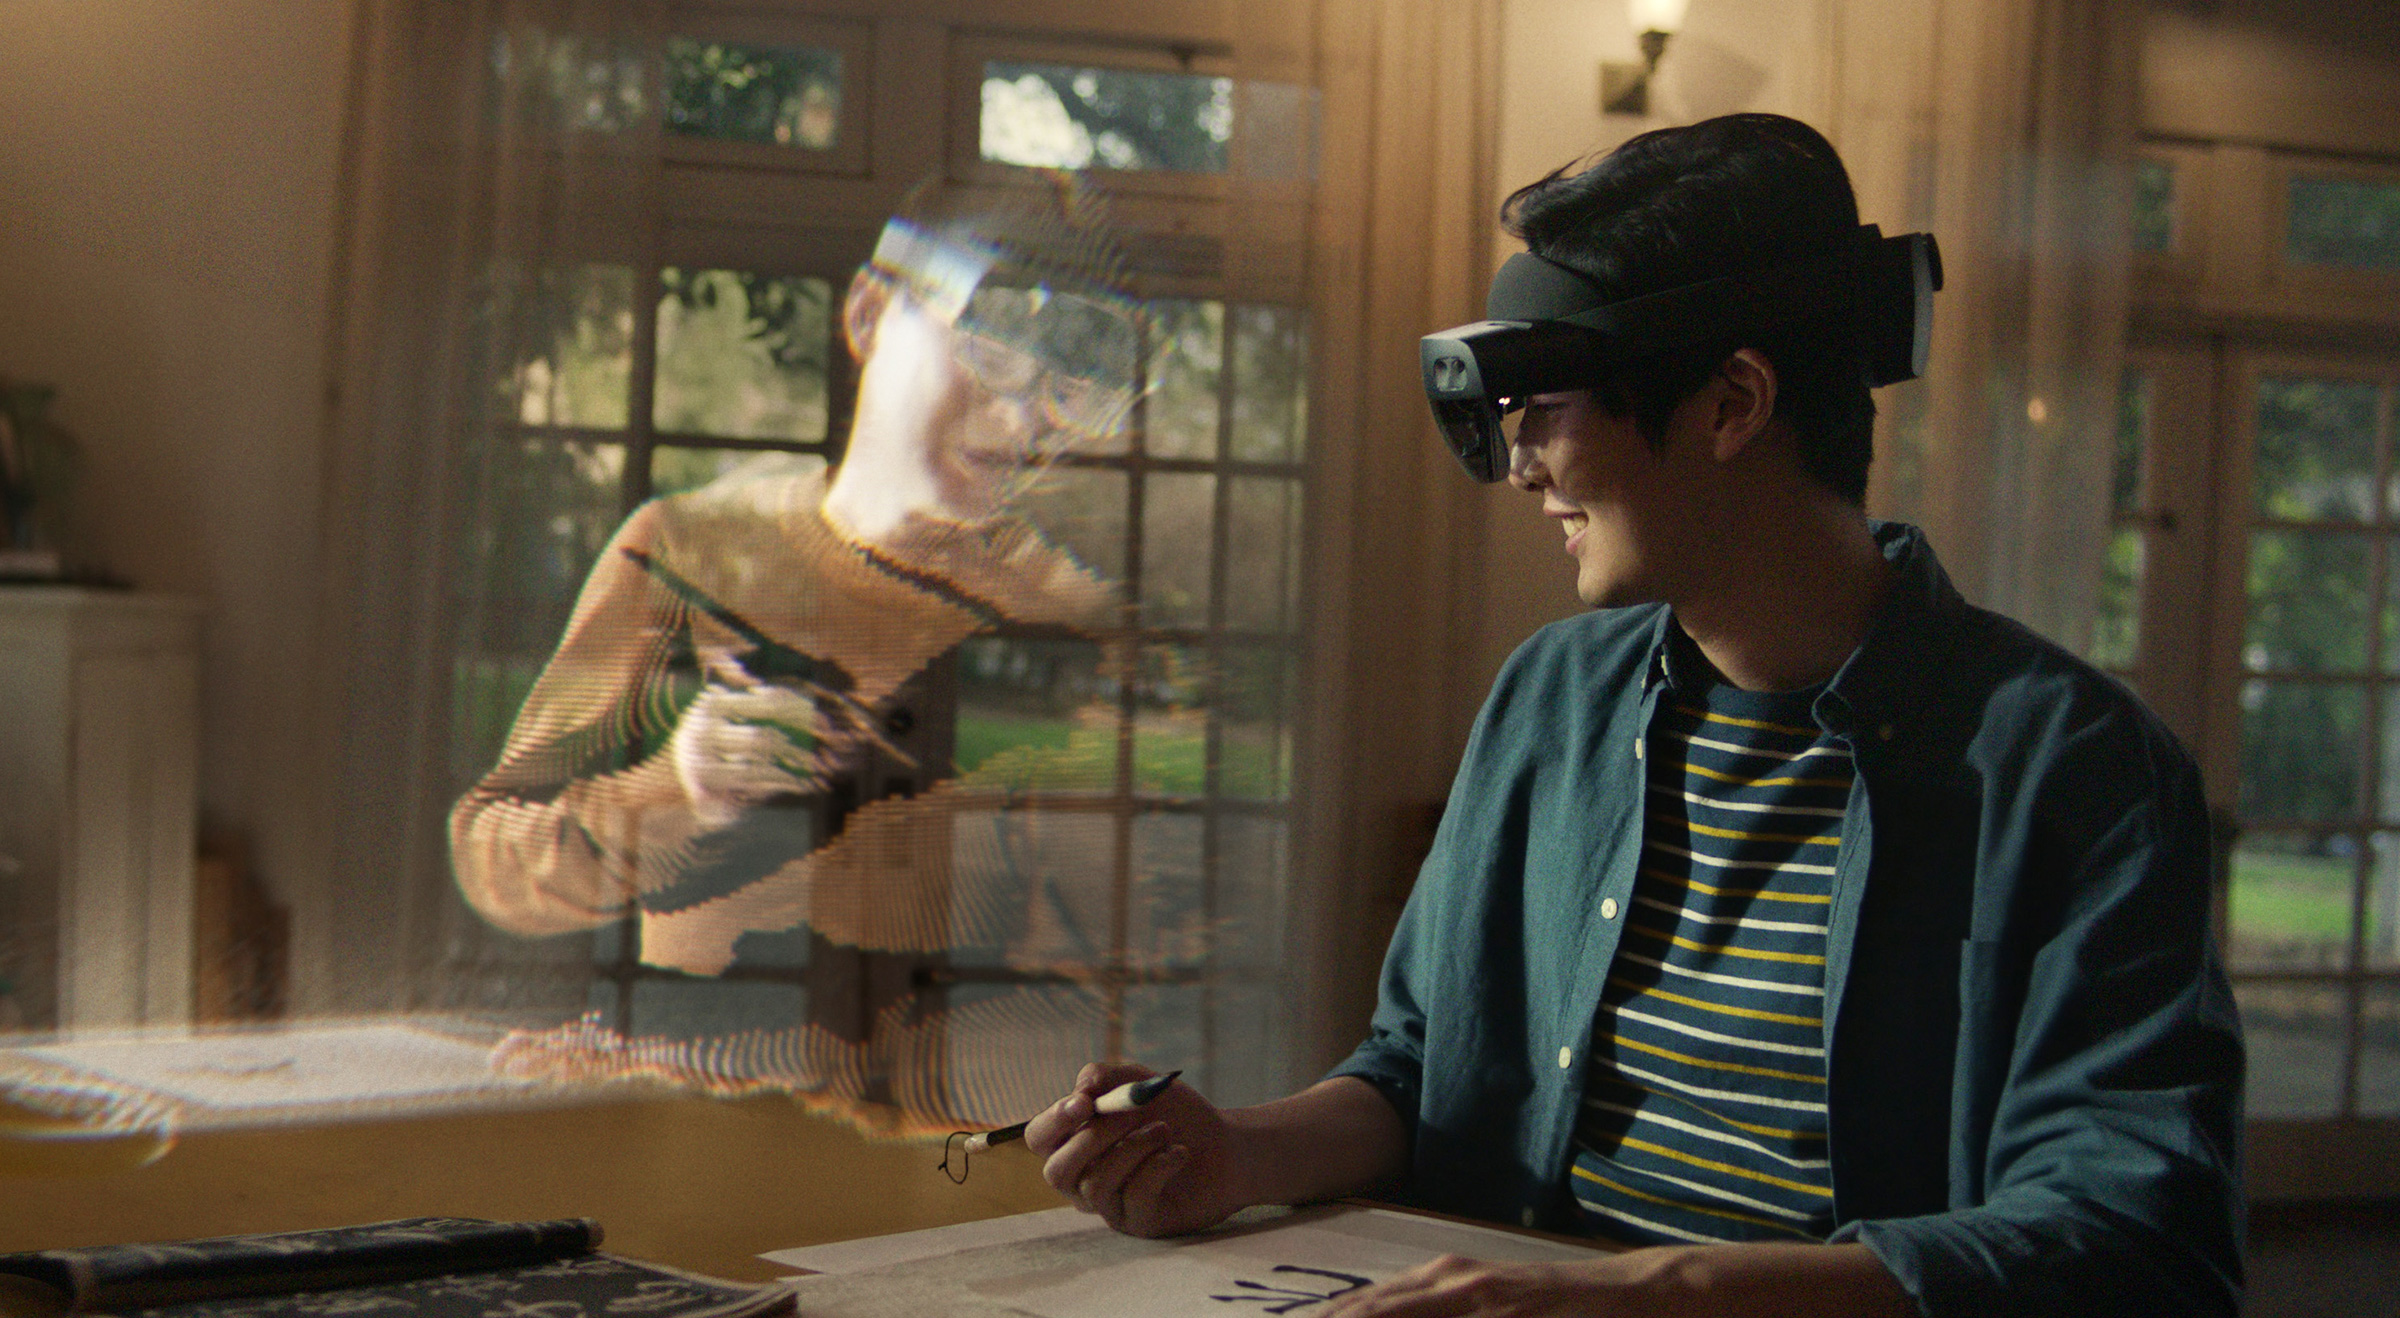 A still from Microsoft Mesh, a new mixed-reality platform powered by Azure that allows people in different physical locations to join collaborative and shared holographic experiences on many kinds of devices. (Courtesy Microsoft)